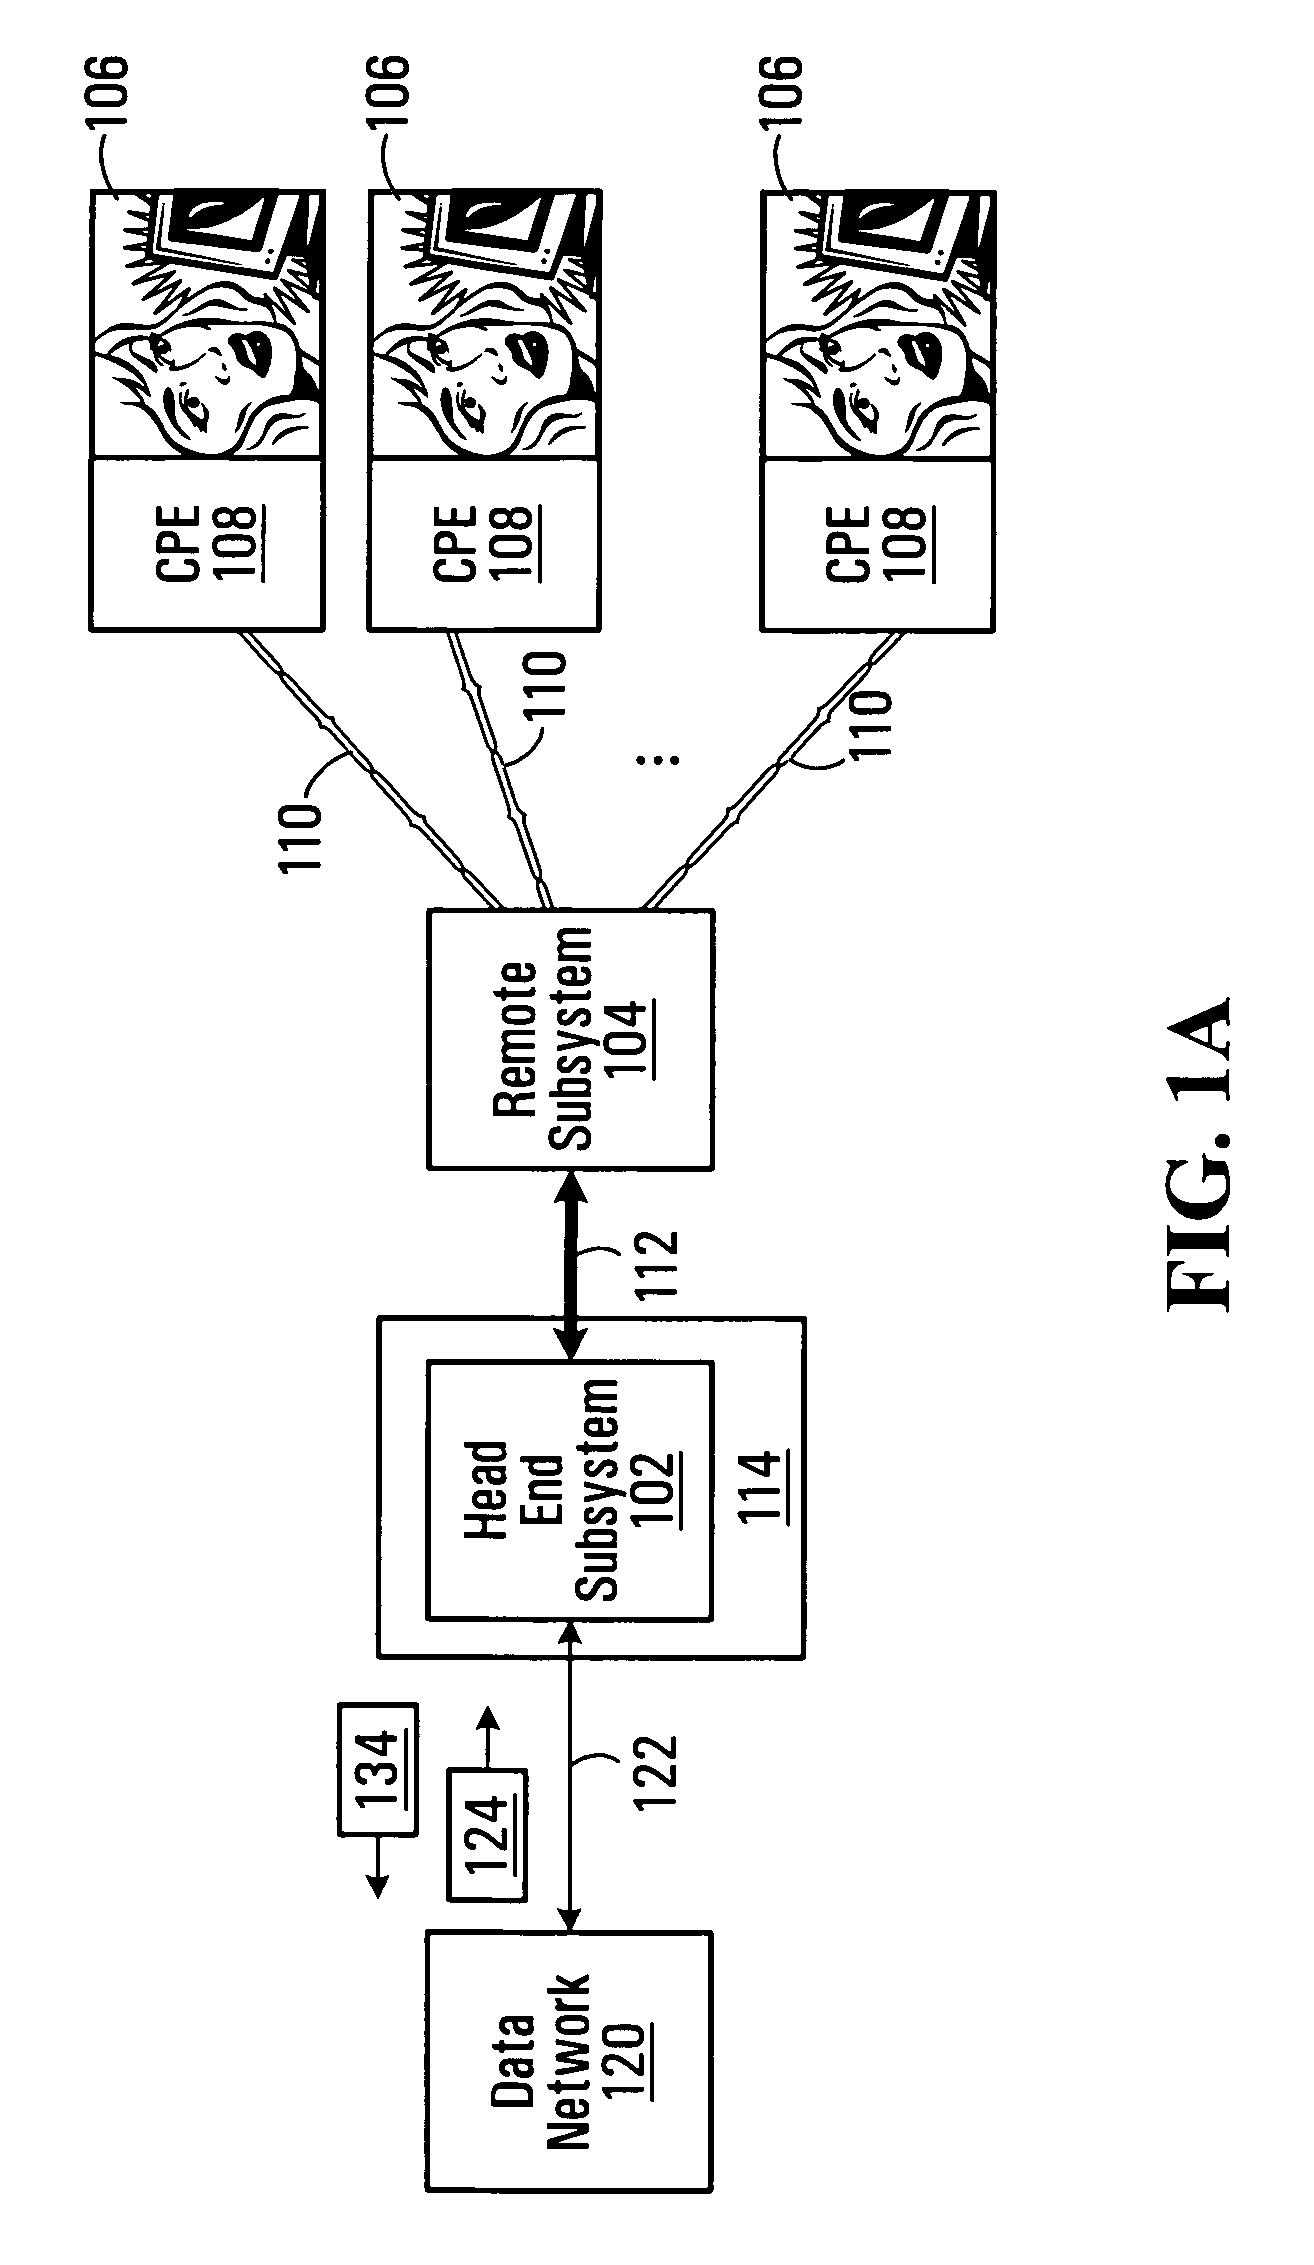 Distributed digital subscriber line access multiplexer